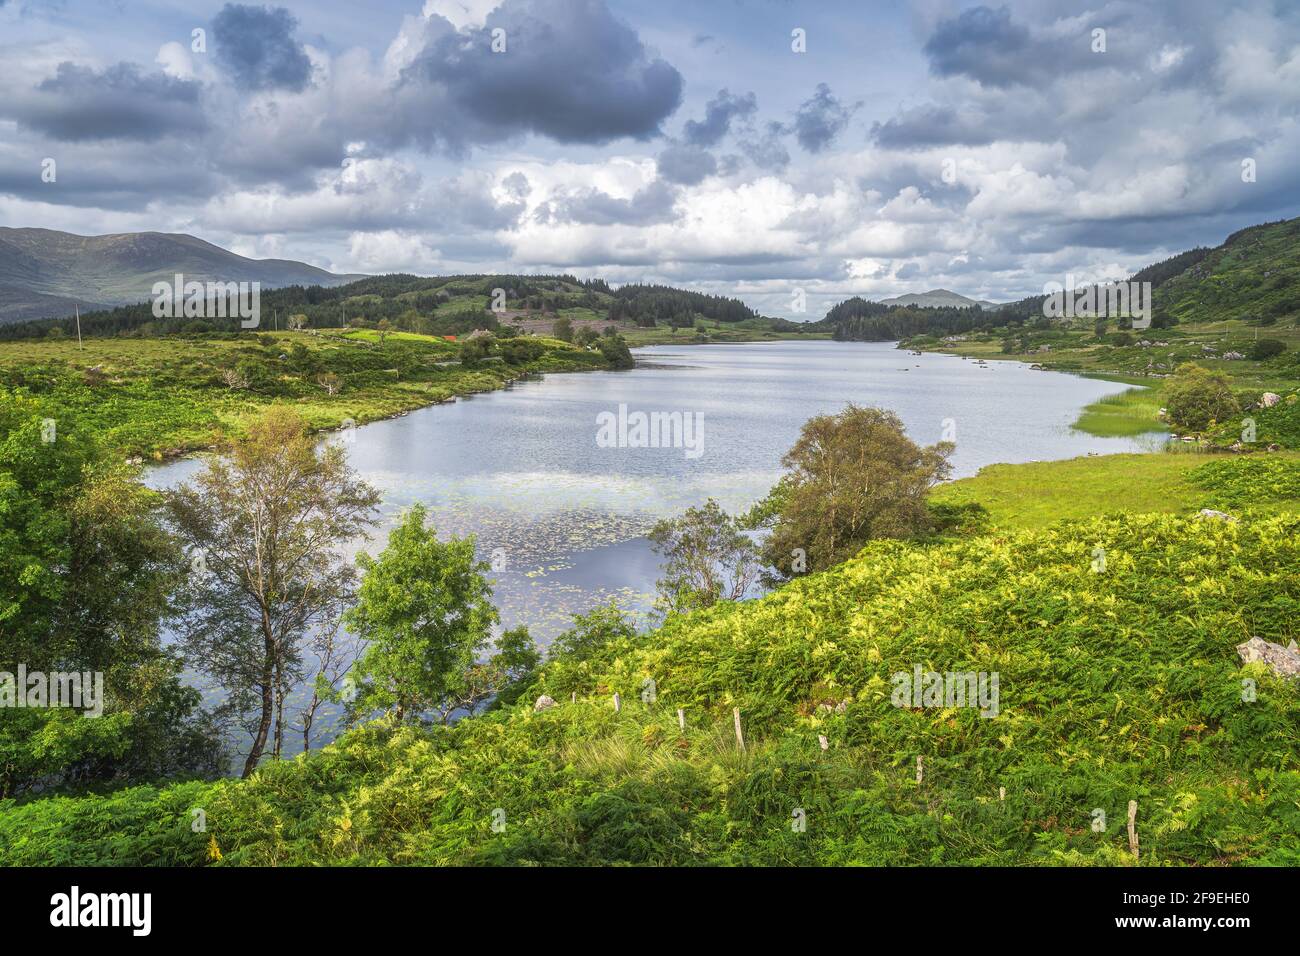 Beautiful lake, Looscaunagh Lough, surrounded by green ferns and hills of  Molls Gap in MacGillycuddys Reeks, Ring of Kerry, Ireland Stock Photo -  Alamy